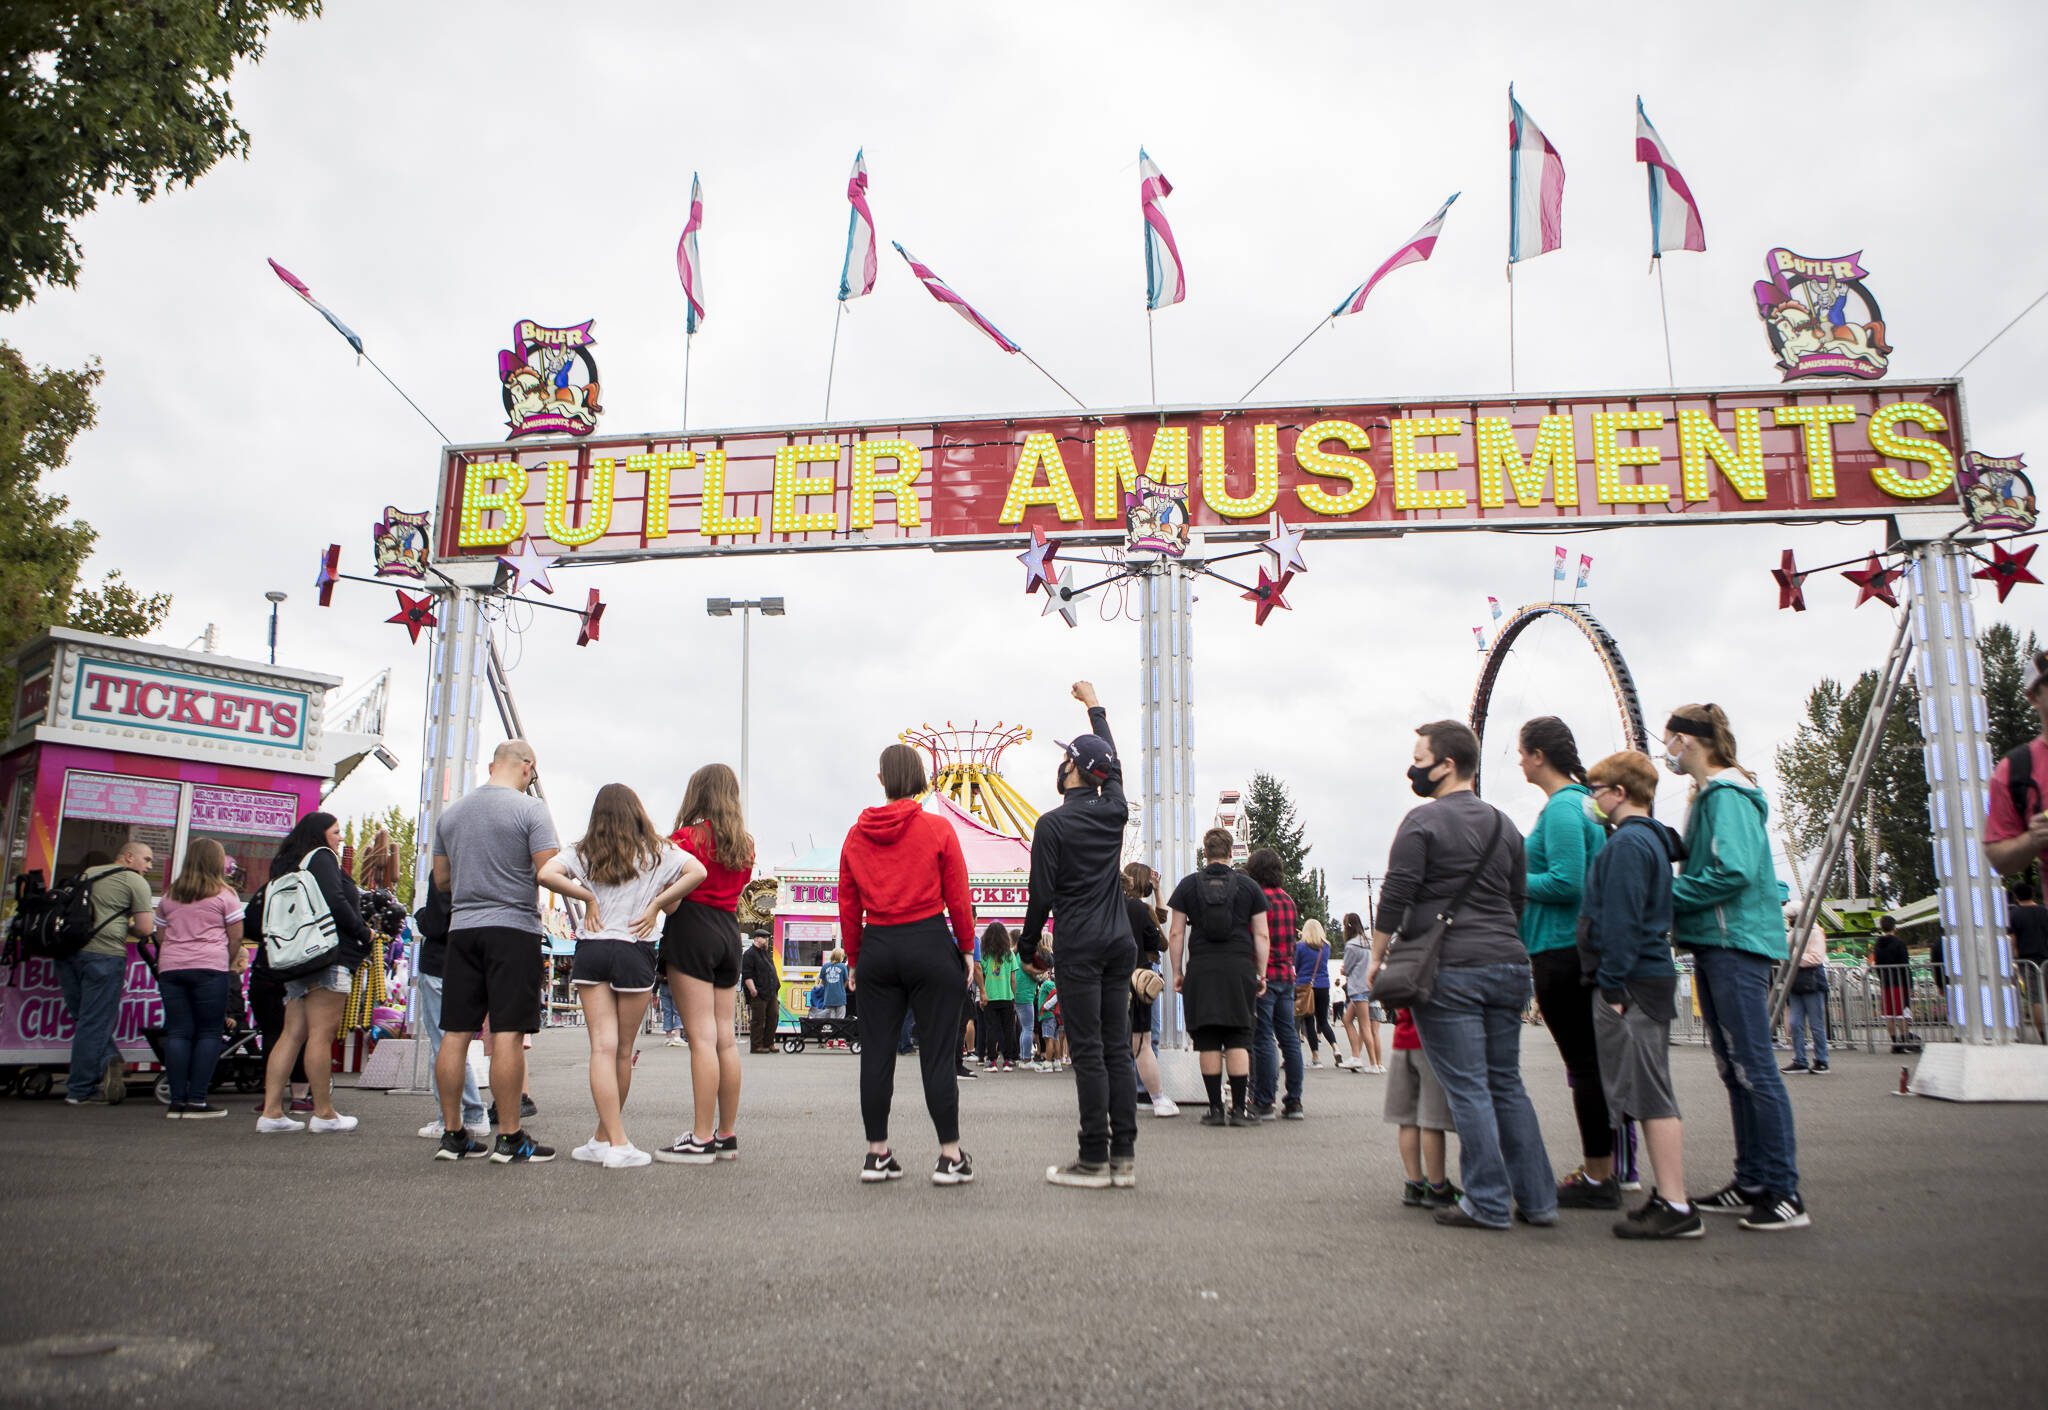 People wait in line for amusement park tickets during opening day of the Evergreen State Fair on Thursday, Aug. 26, 2021 in Monroe, Wash. (Olivia Vanni / The Herald)